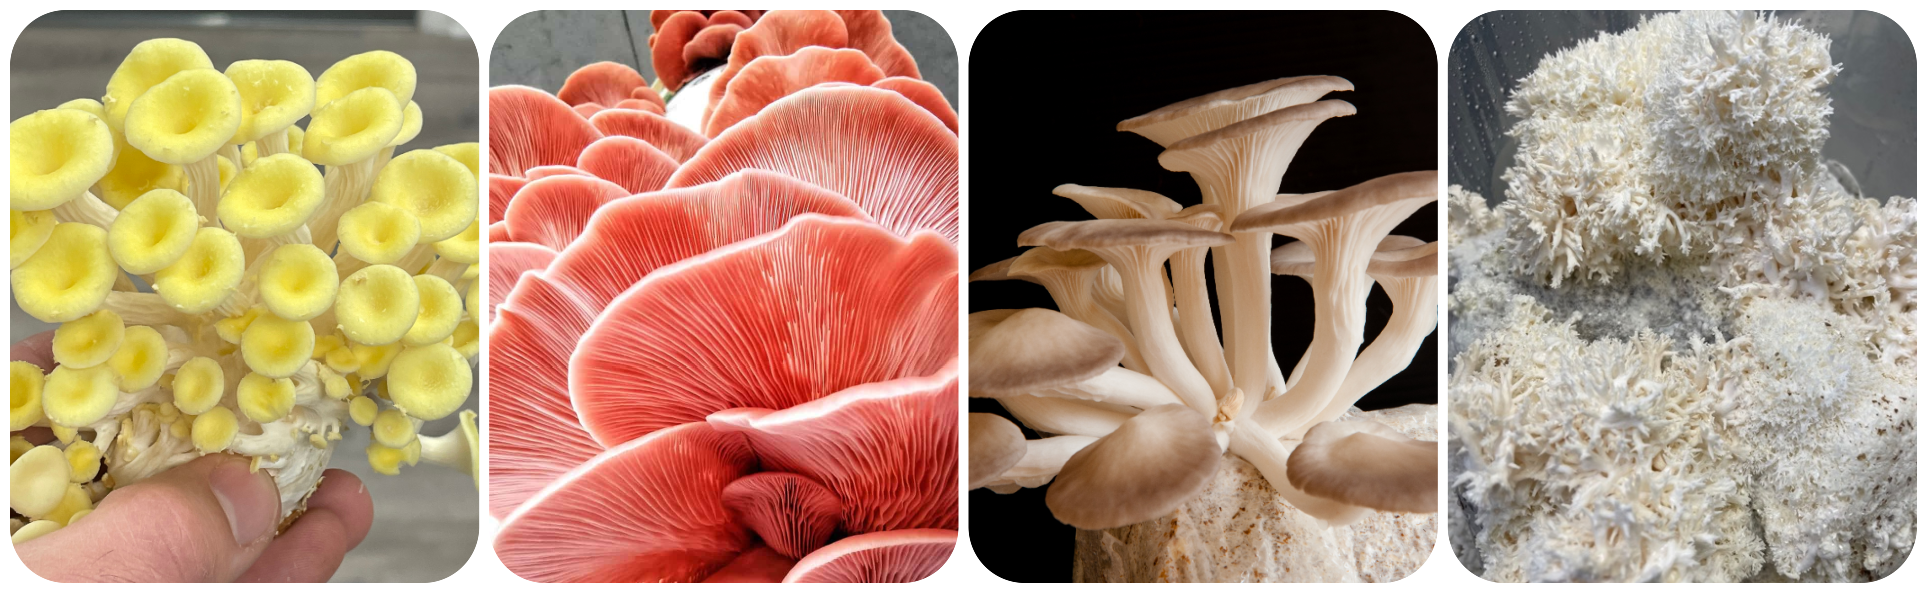 https://www.mycolabs.com/resize/images/mushroom_collage.png?